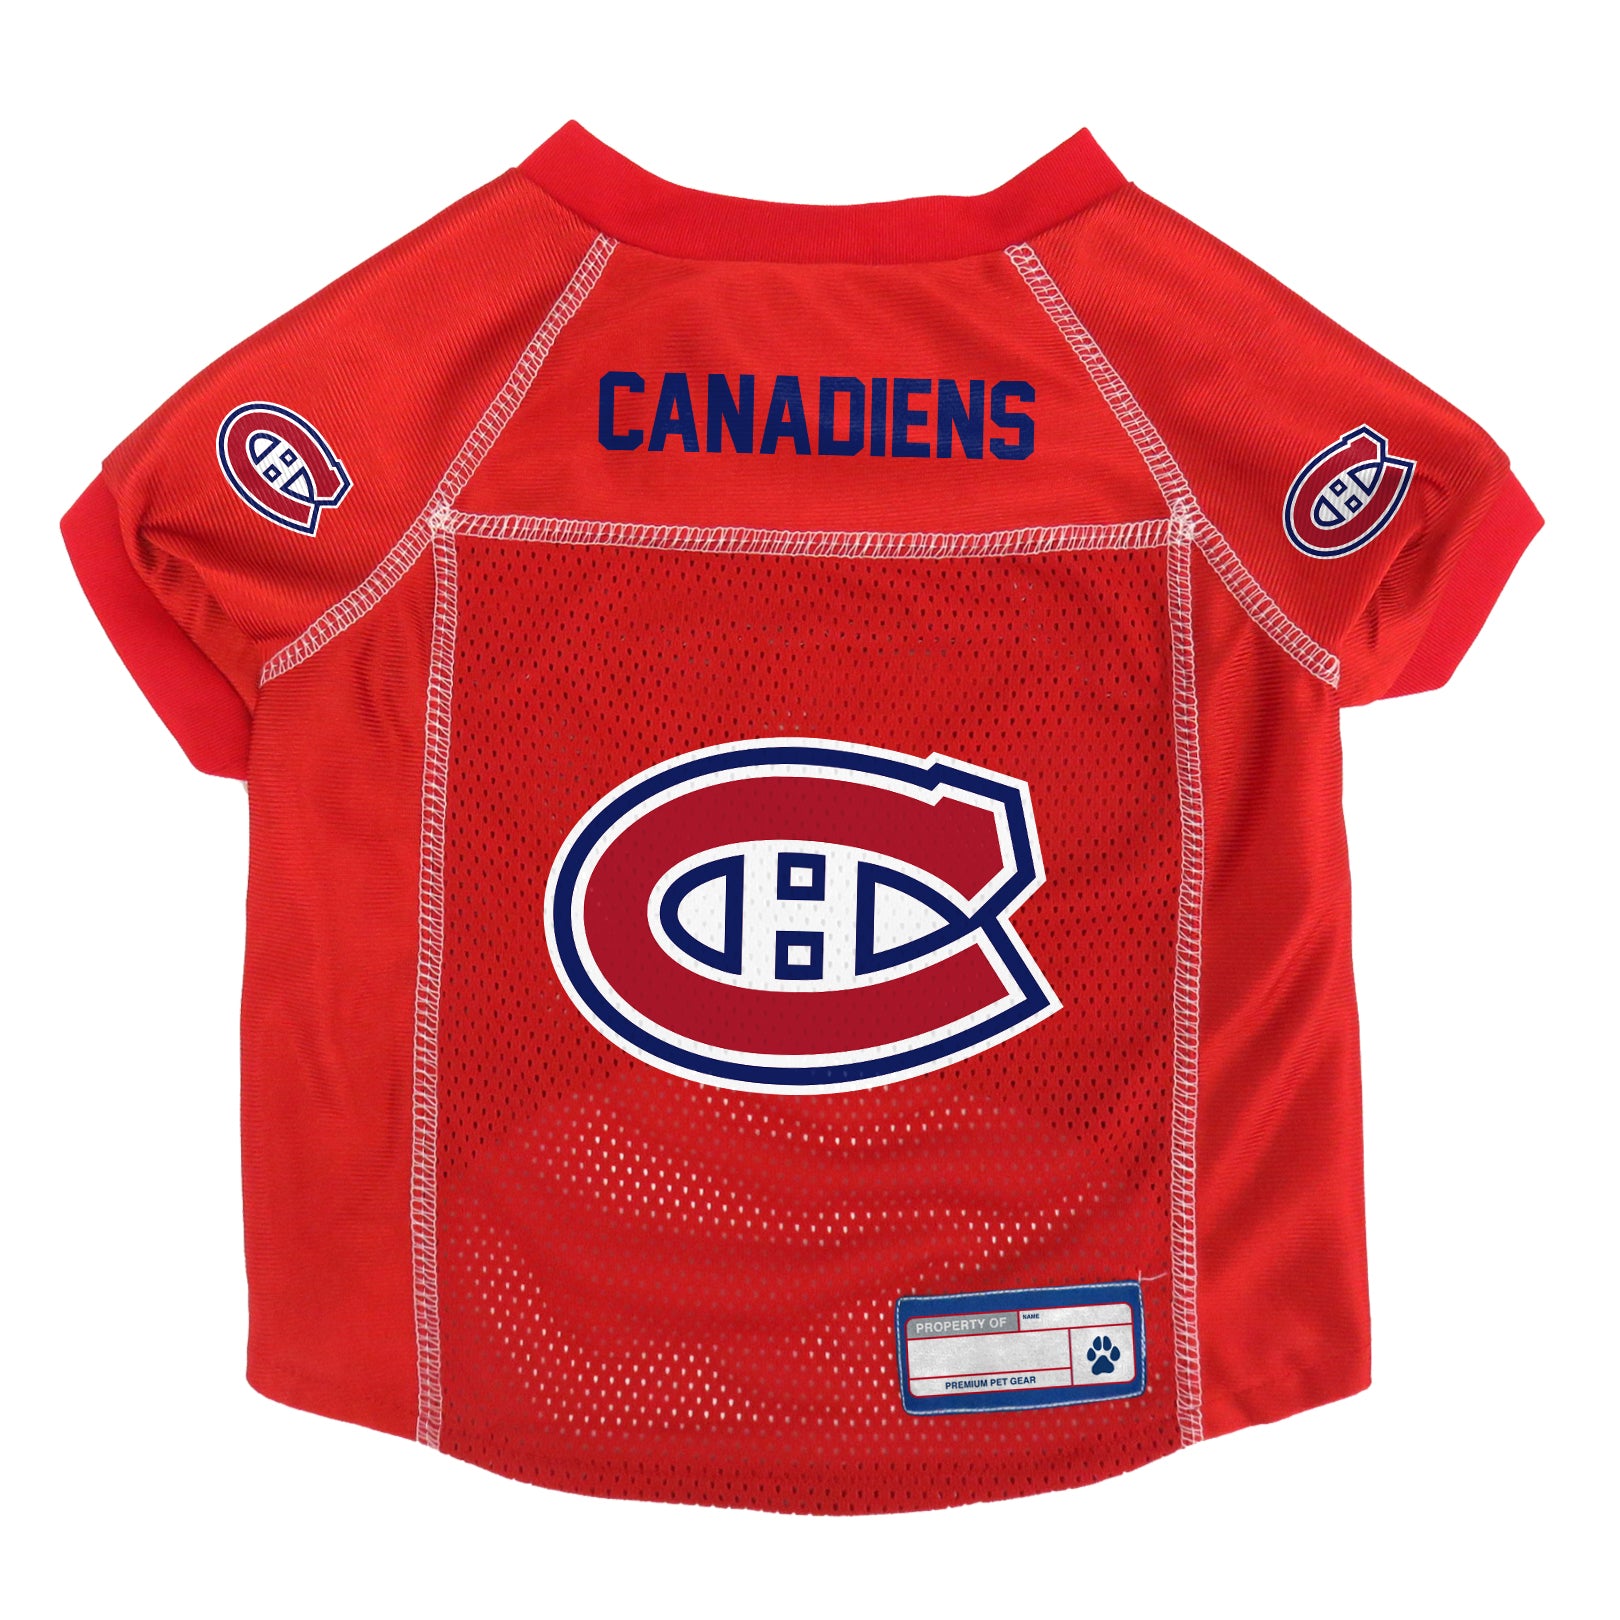 Montreal Canadiens Name and Number Gear , Canadiens Name & Number Gear  t-shirts, hoodies, jerseys, Name and Number Montreal Canadiens shirts